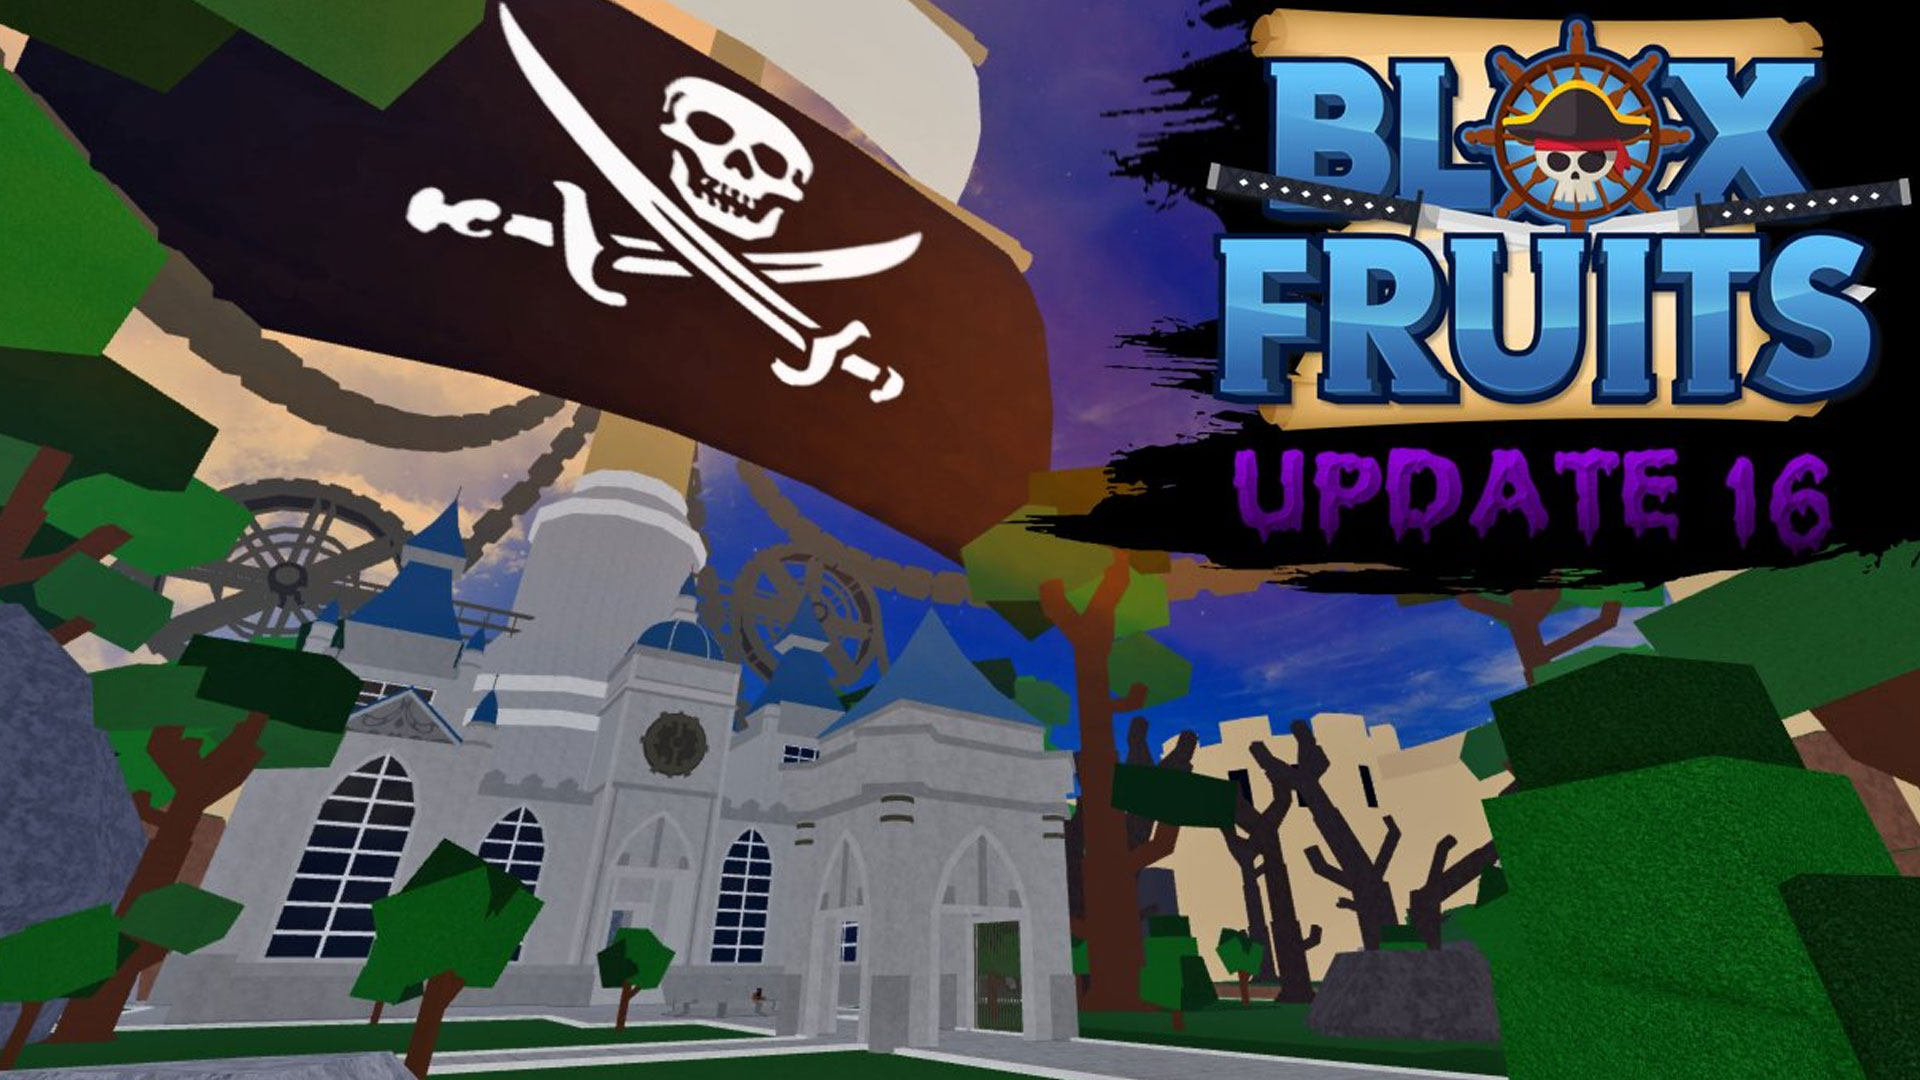 New Codes For Blox Fruits Update 16 Patch Notes: Halloween Update